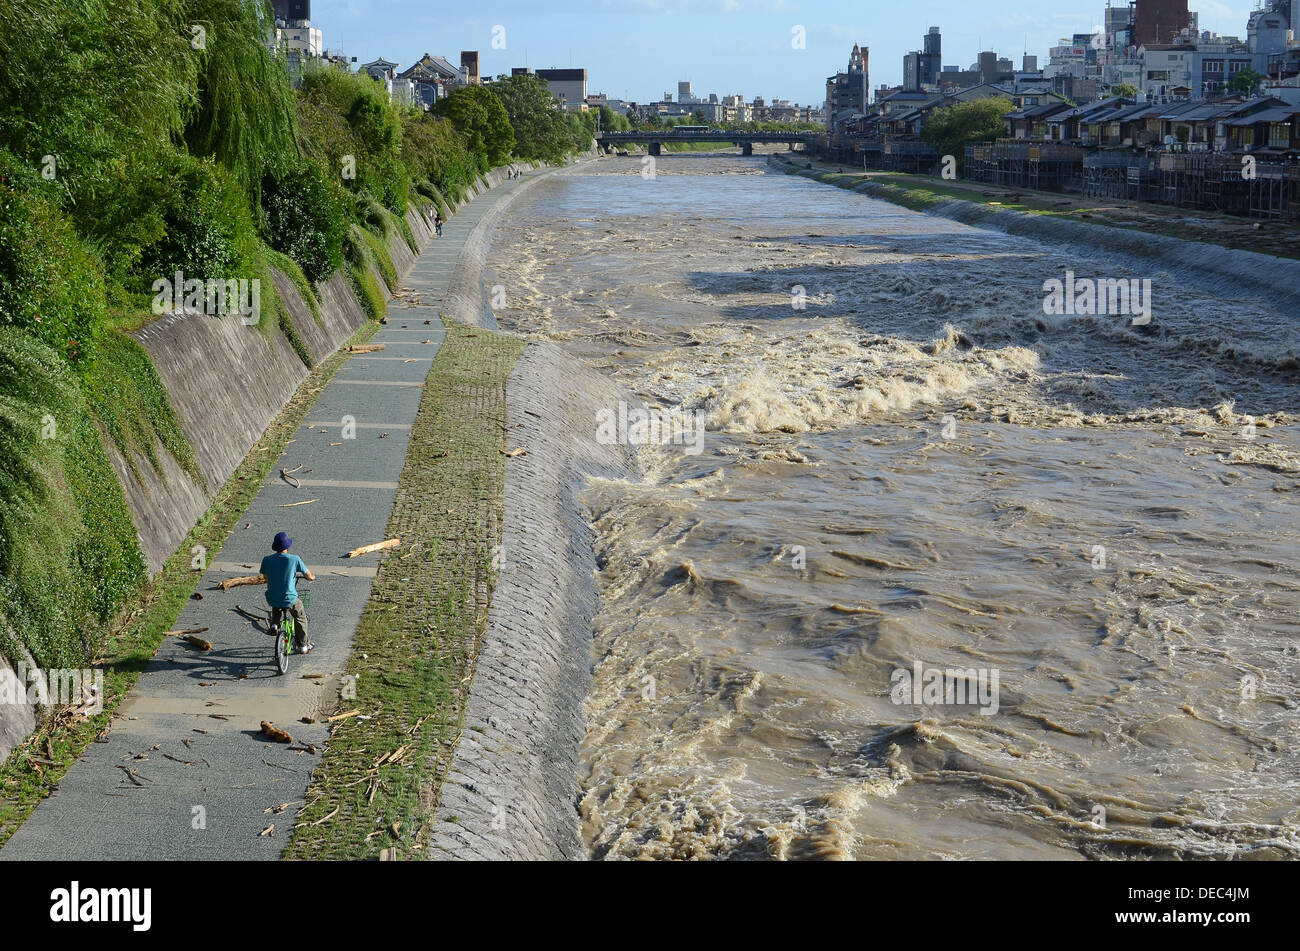 Kyoto, Japan. 16th September, 2013. Typhoon Man-yi makes landfall in Japan. Picture shows a very rough Kamo River running through Kyoto City. The typhoon hit the area early Monday morning local time and by 7pm had moved up the main island of Honshu to Tokyo, causing serious flooding in some areas. As of 7pm local time, more than 400,000 had been ordered to evacuate their homes across three prefectures, with reports of two deaths, four missing and 28 injured across the country. Credit:  Trevor Mogg / Alamy Live News Stock Photo